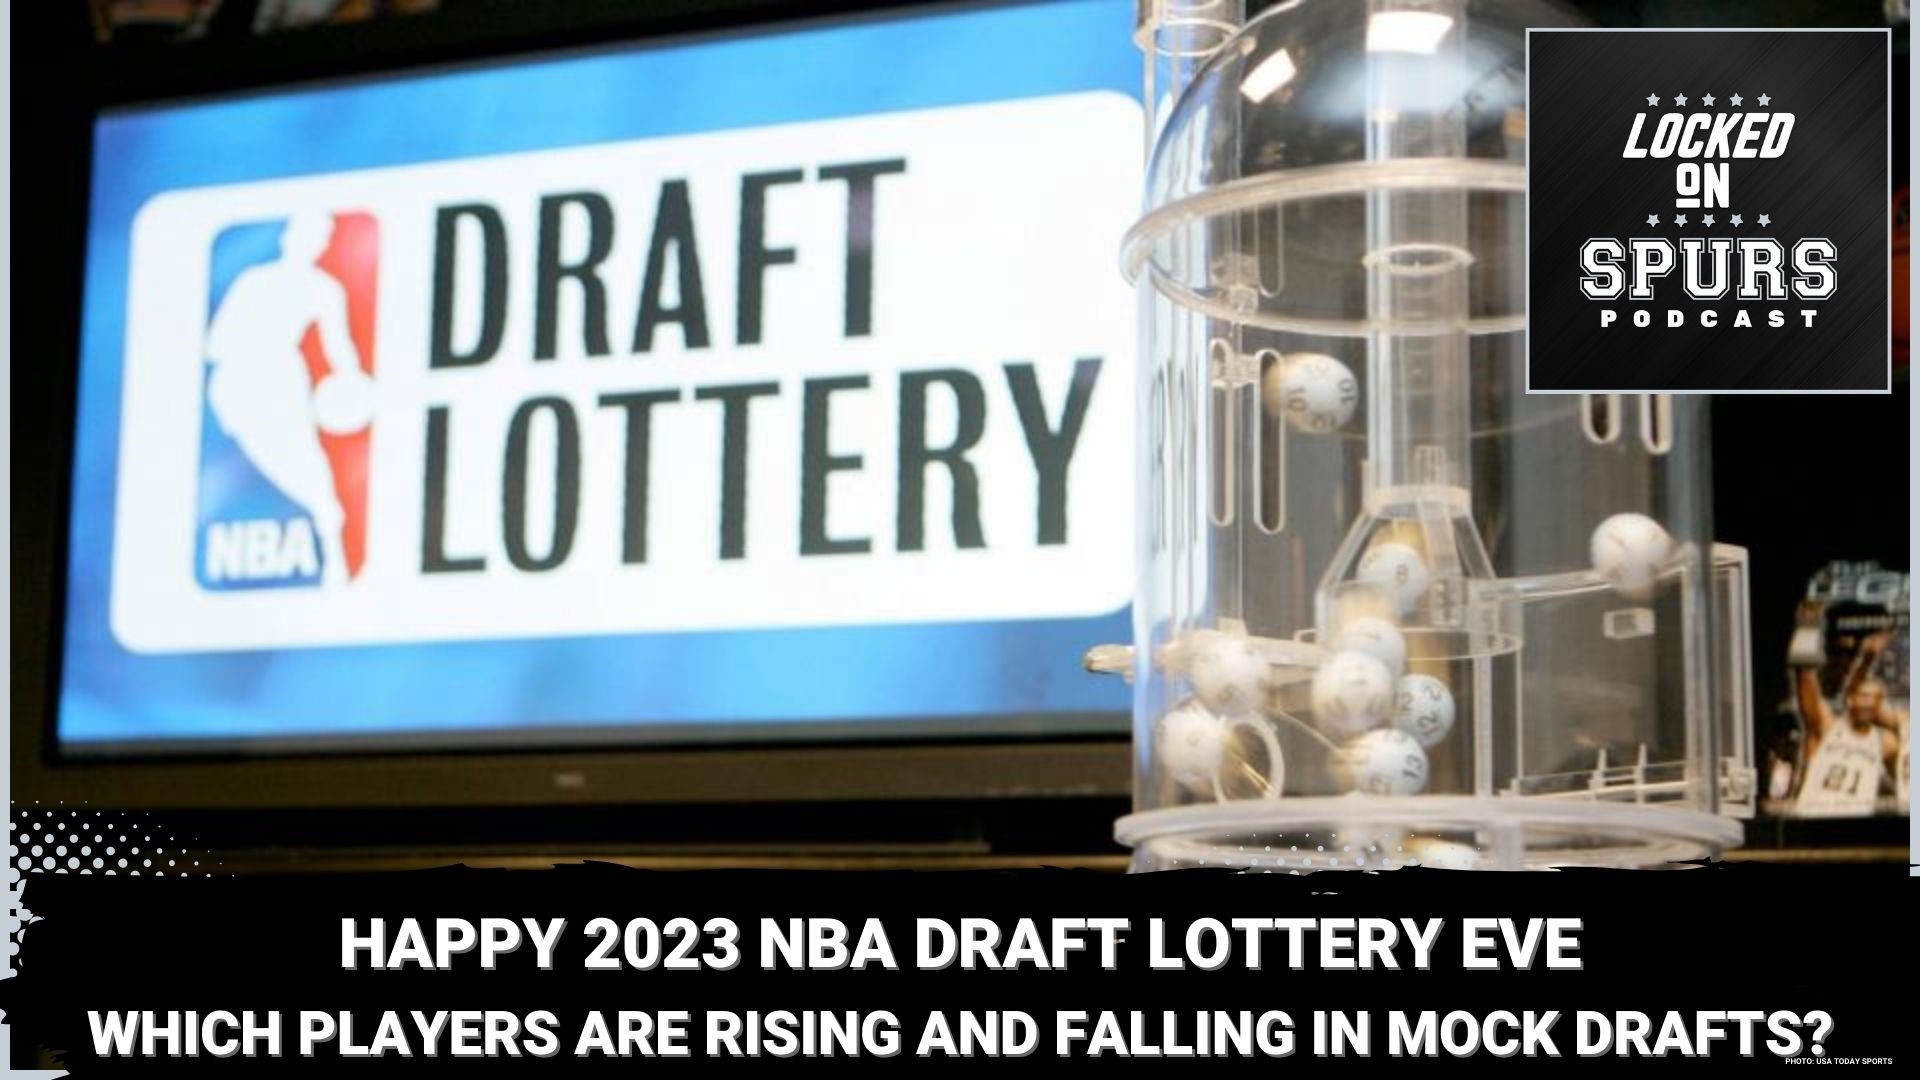 The NBA will announce where the Spurs land in the Draft Lottery Tuesday night.